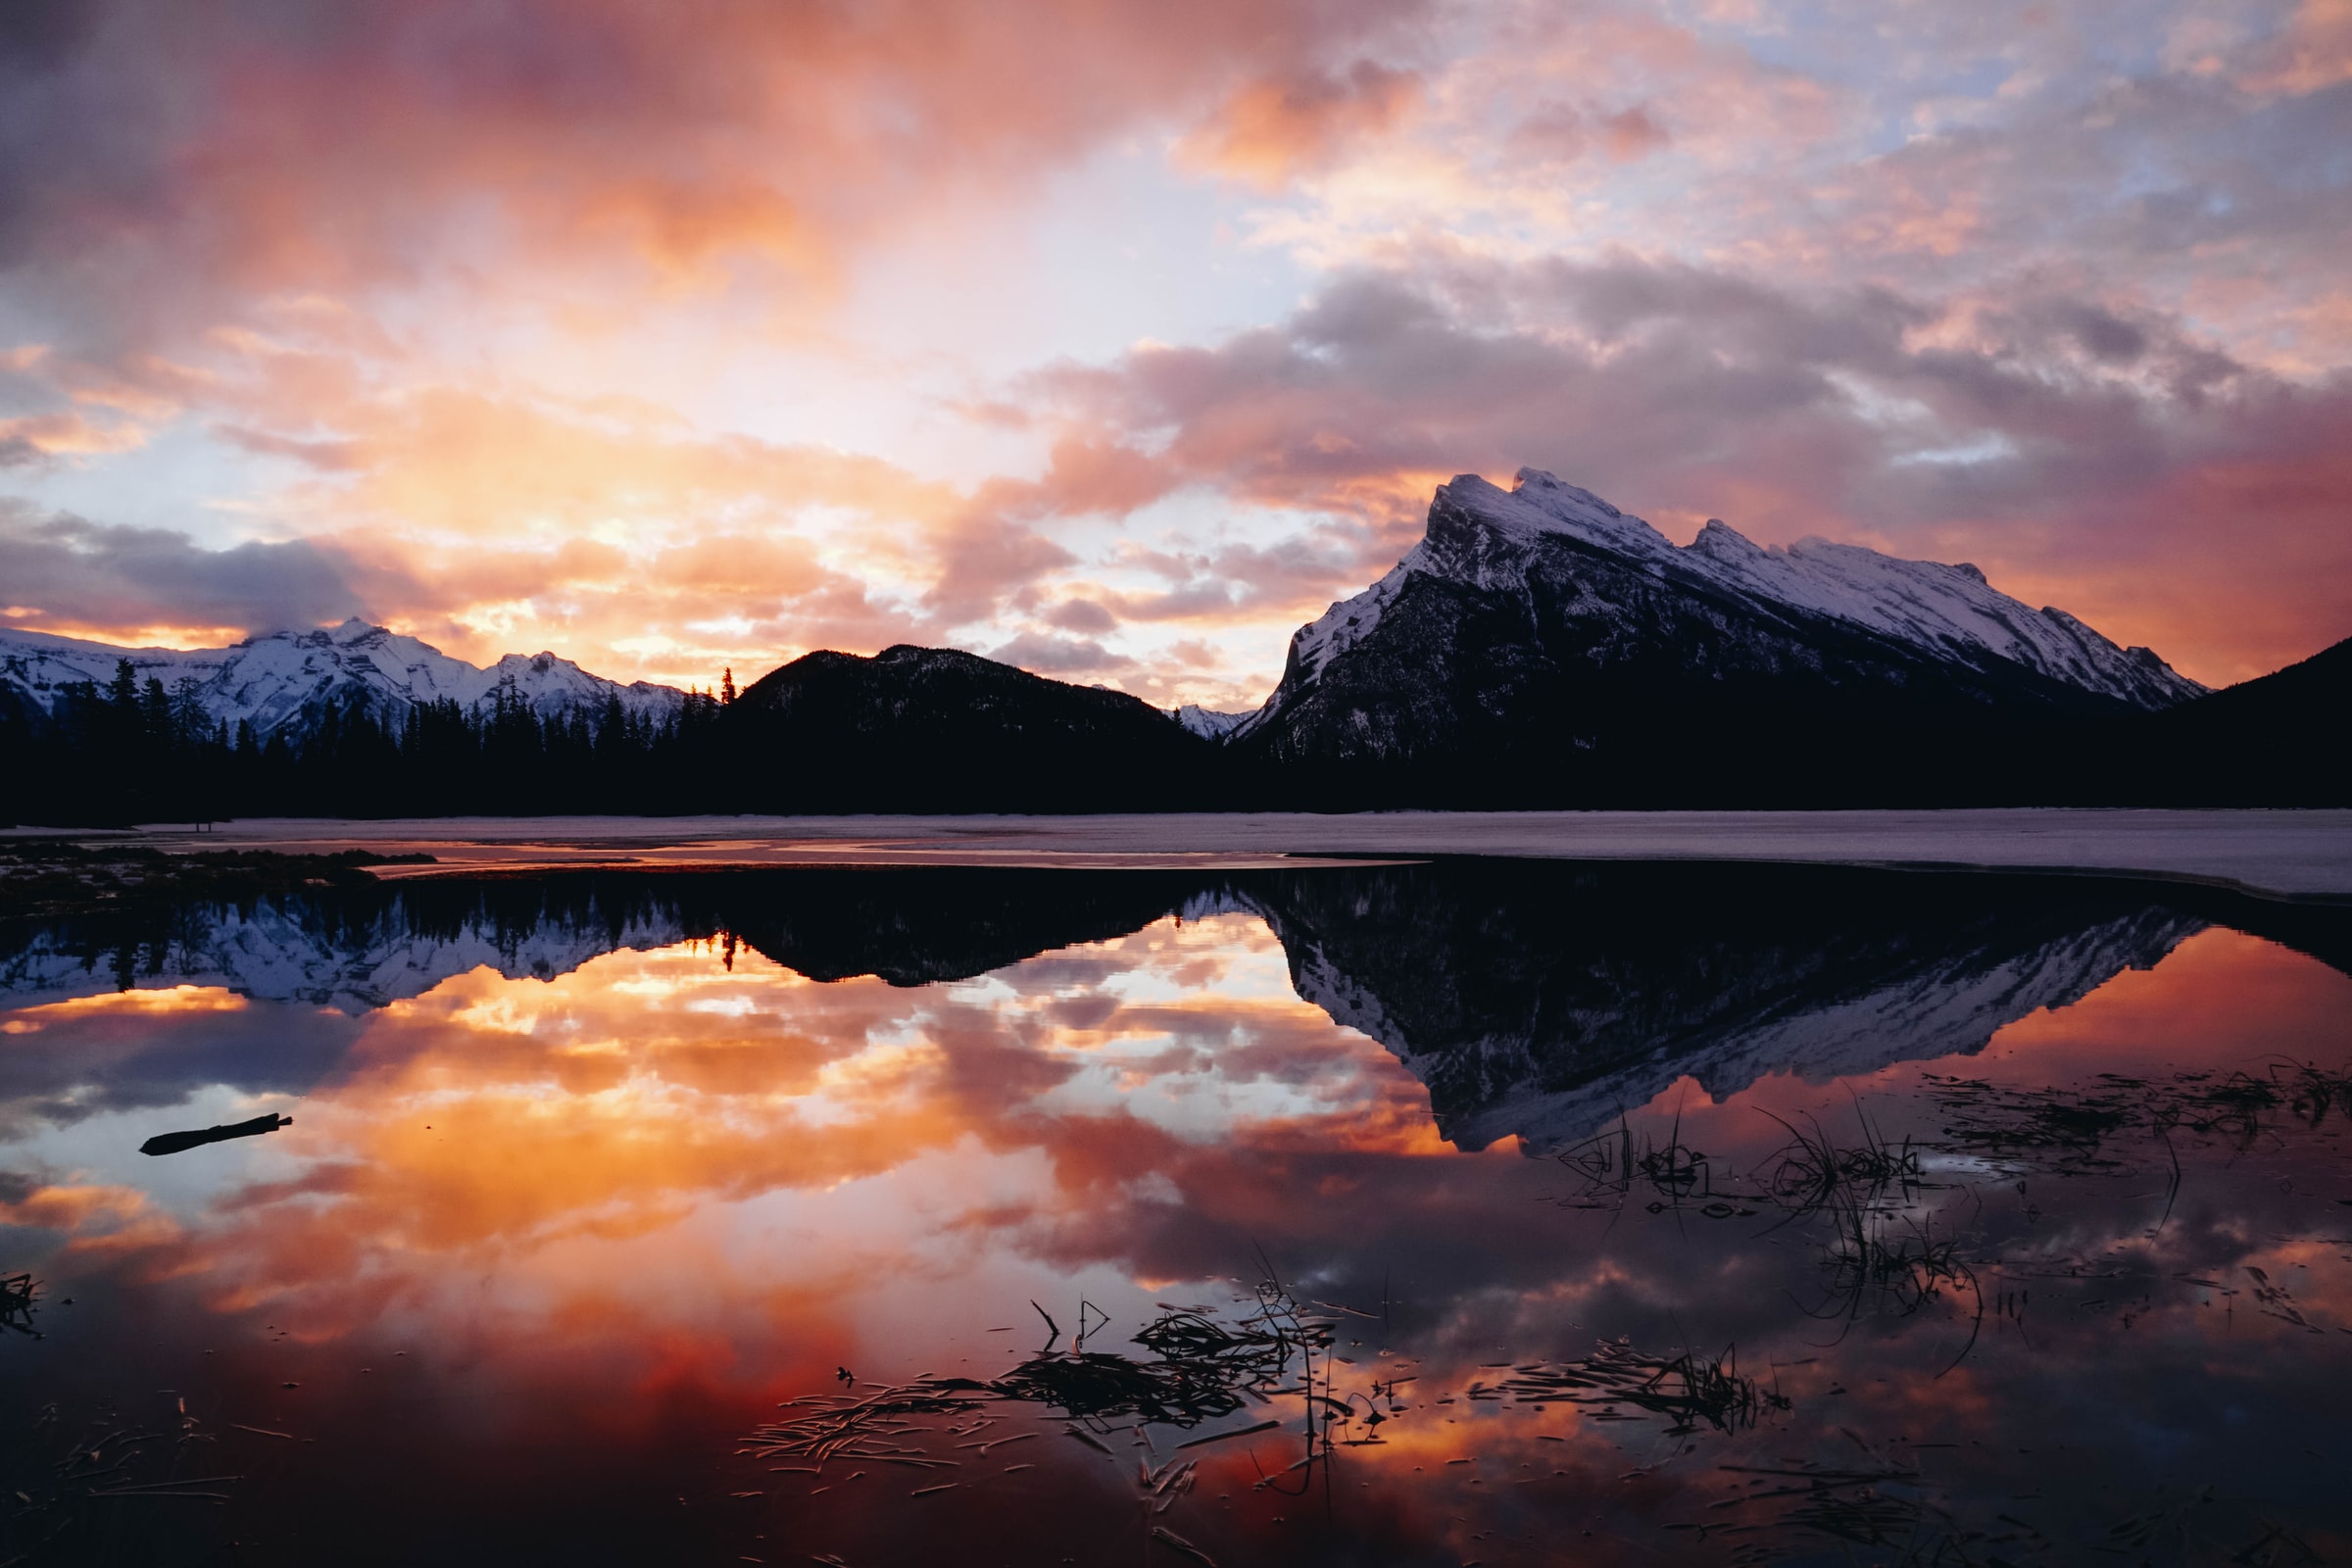 The iconic Rundle Mountain reflecting in Vermillion Lakes during a colourful sunset is an iconic Canadian Rockies photograph